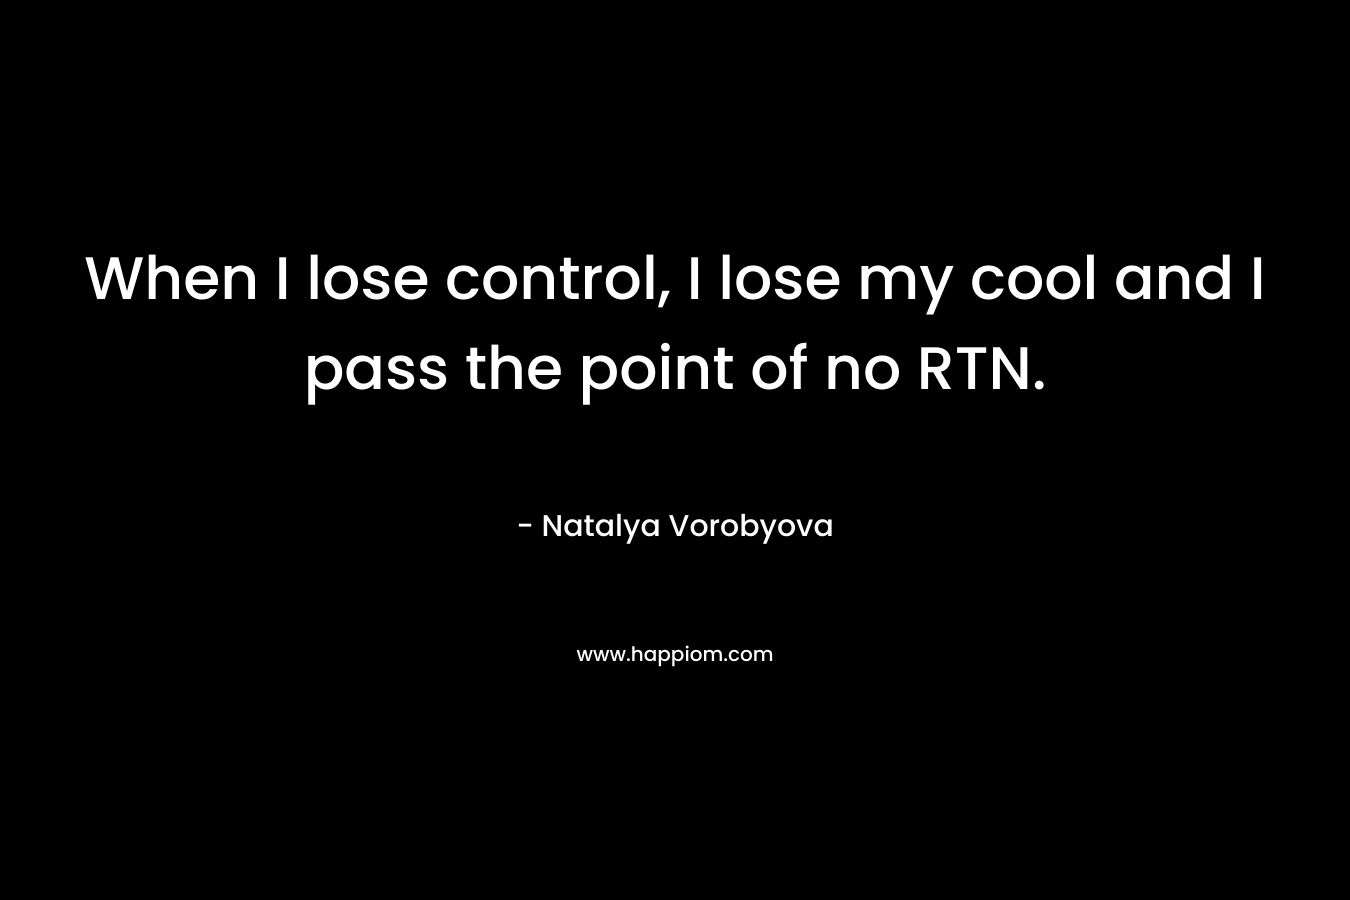 When I lose control, I lose my cool and I pass the point of no RTN. – Natalya Vorobyova